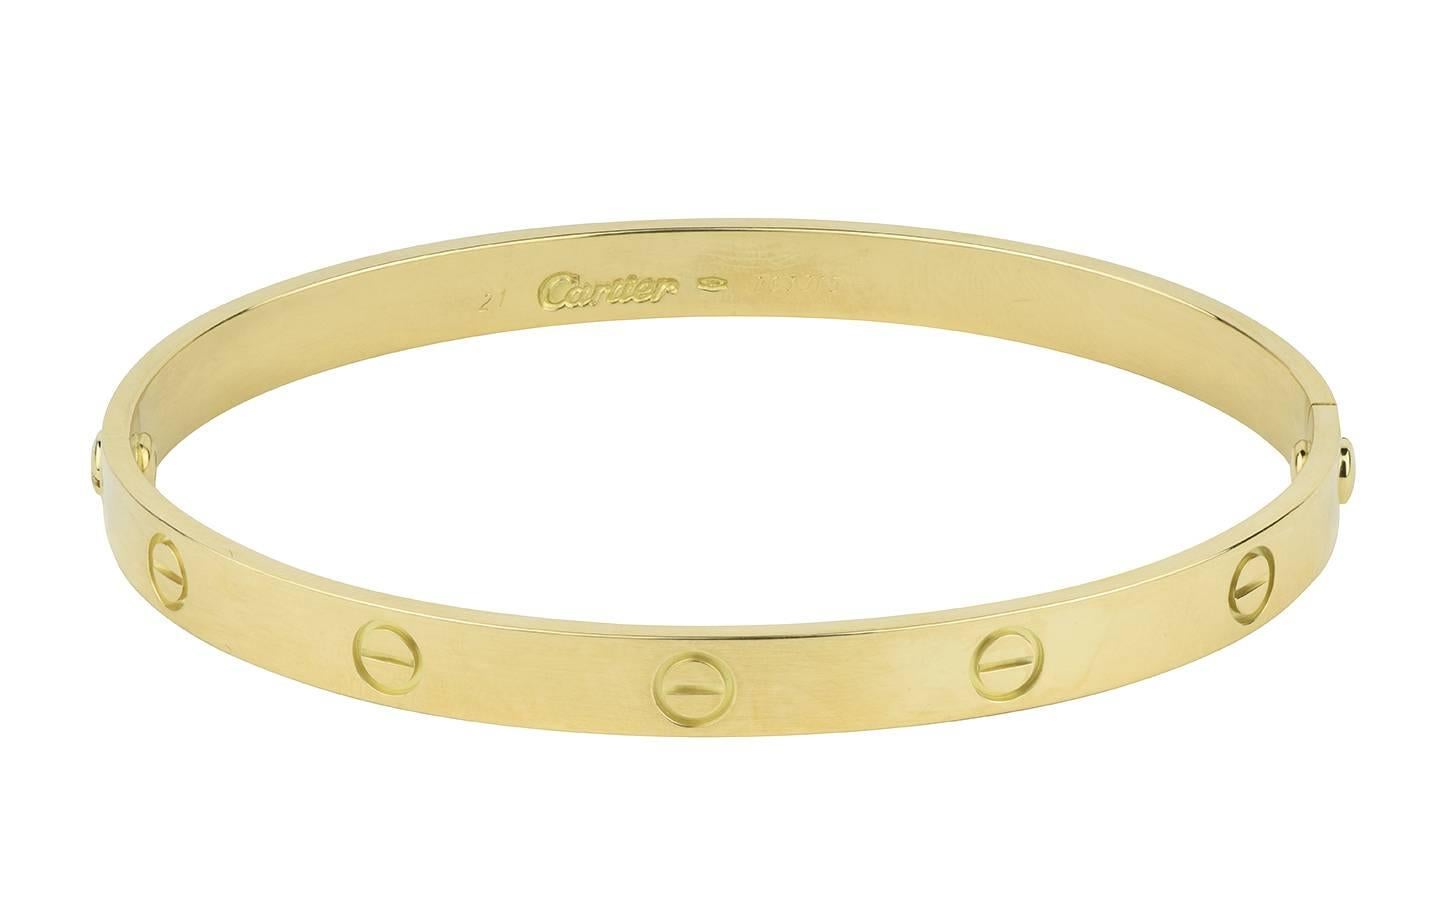 The iconic Cartier Love bracelet in 18k yellow gold.

Hallmark:  750
Serial:  763315
*7 1/2 inches
(screwdriver not included)